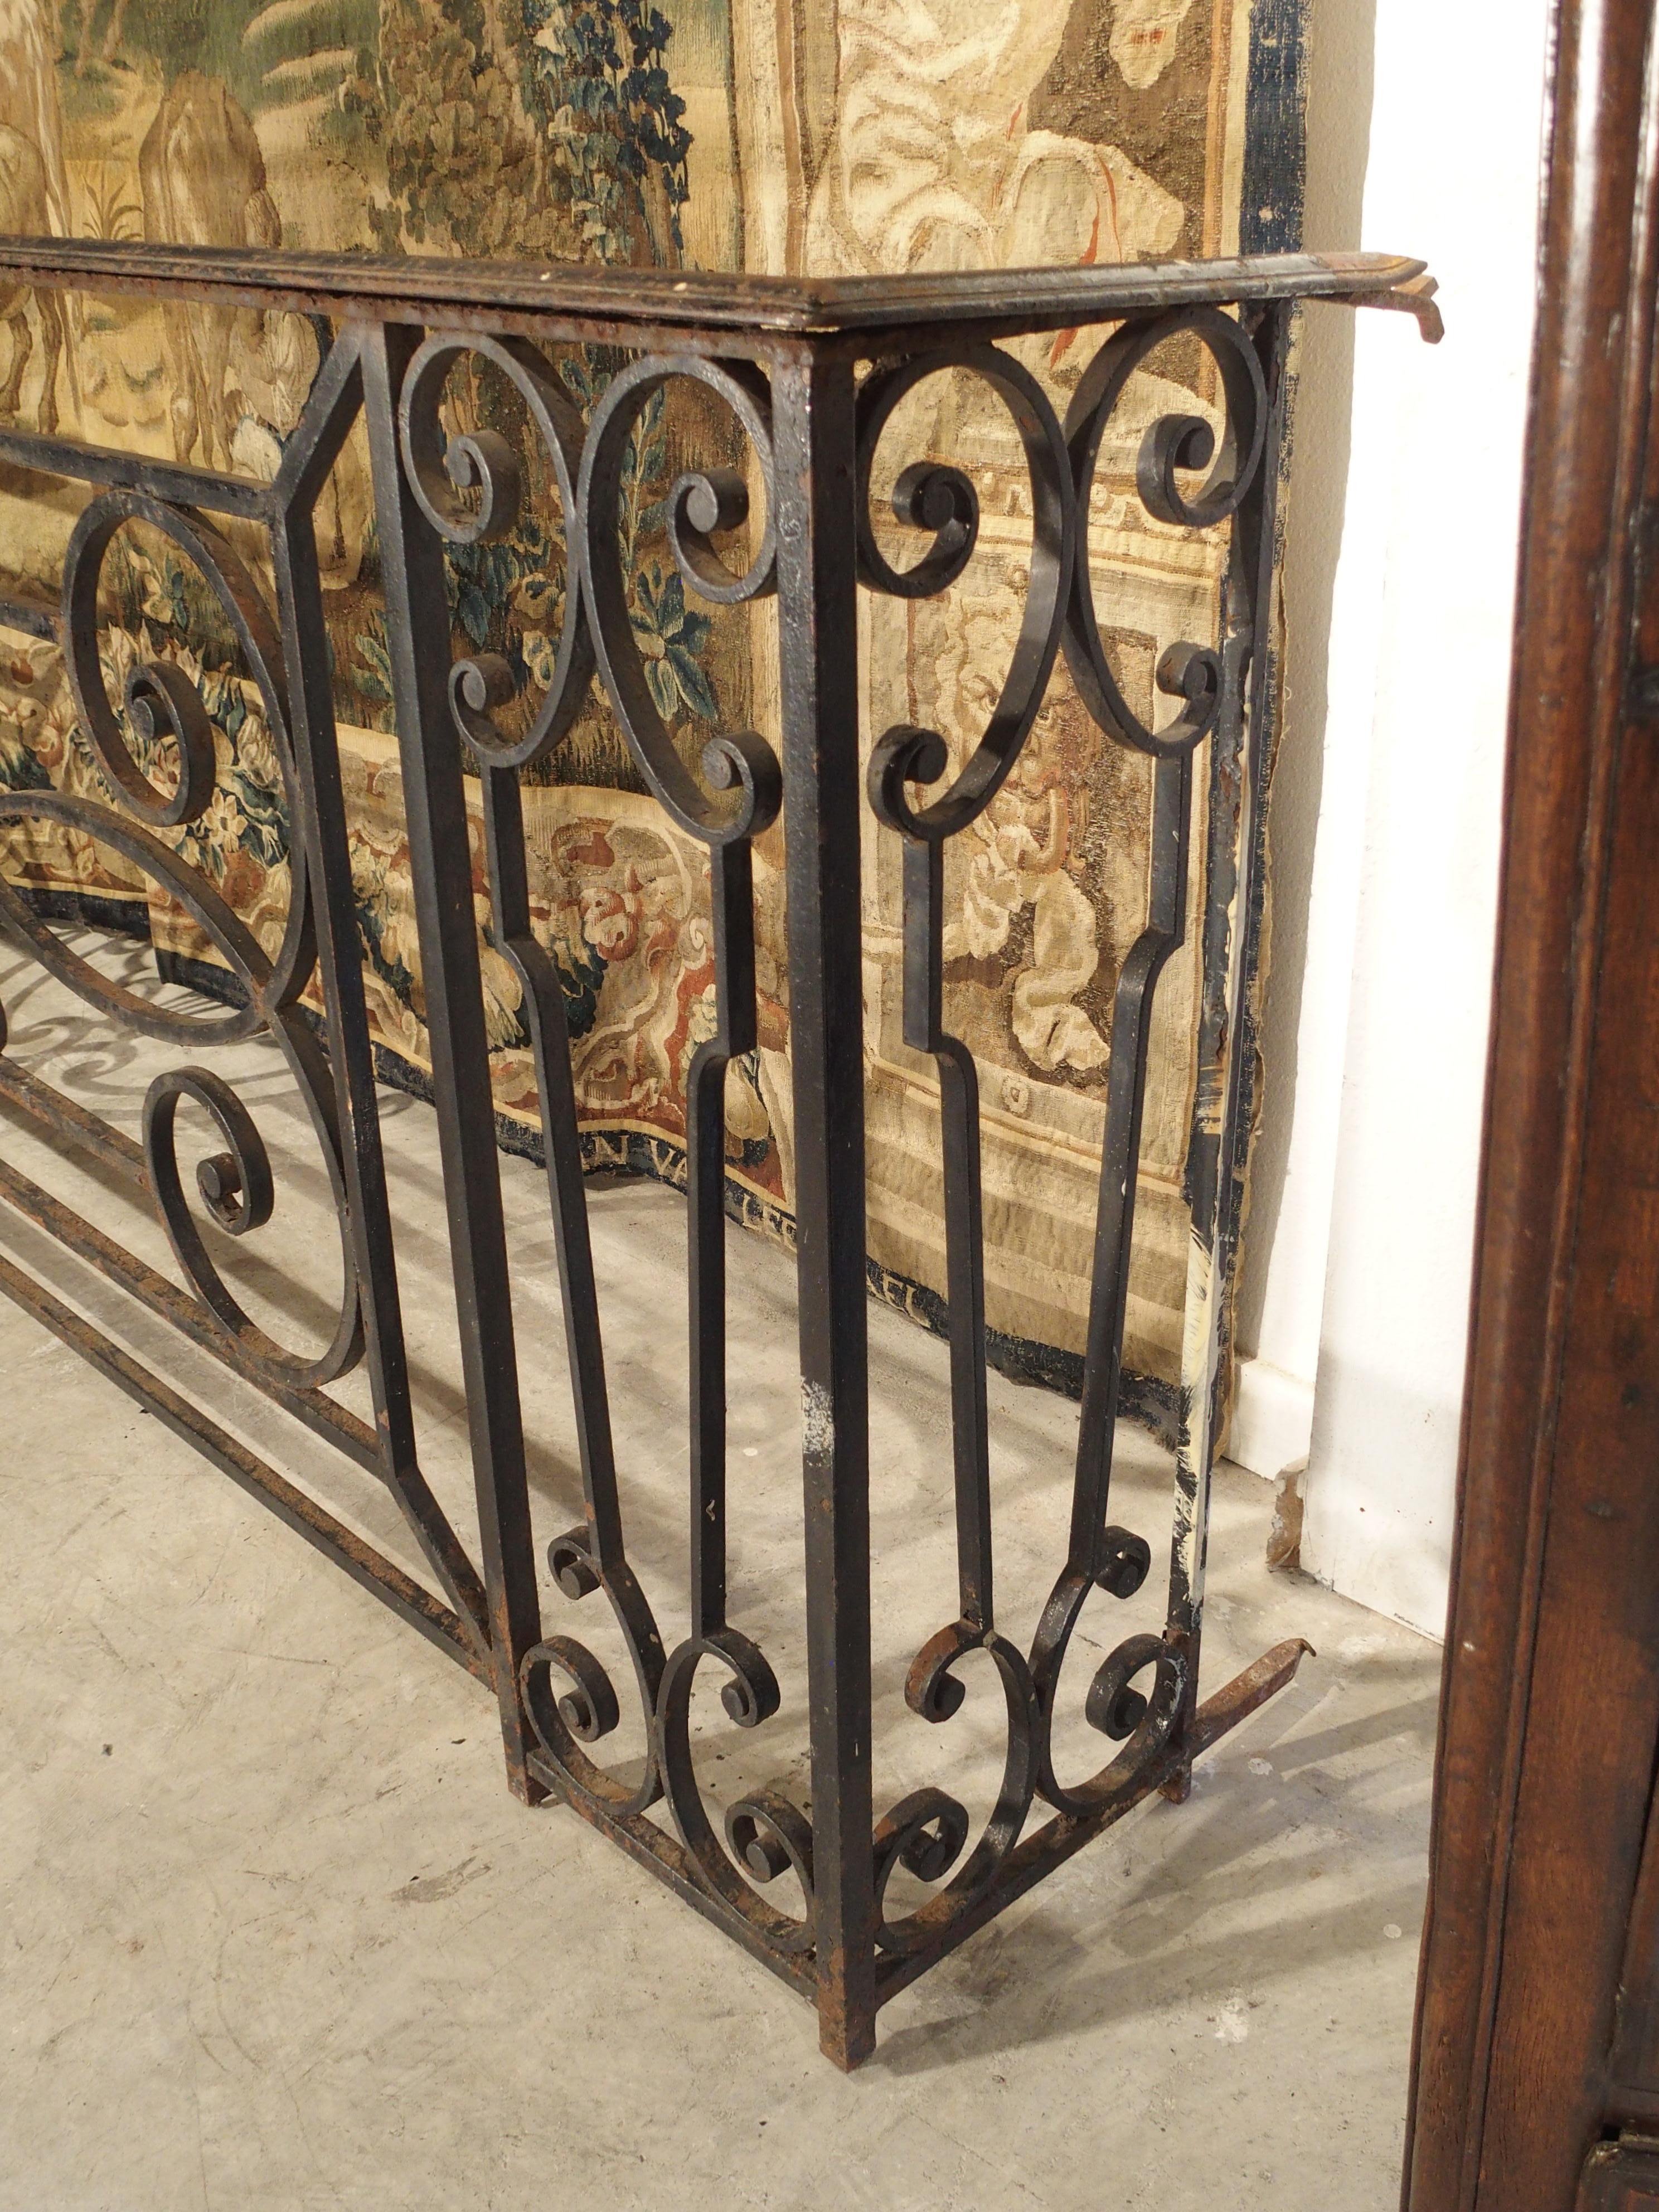 20th Century A Long Belle Époque Antique Wrought Iron Balcony Gate from Argentina